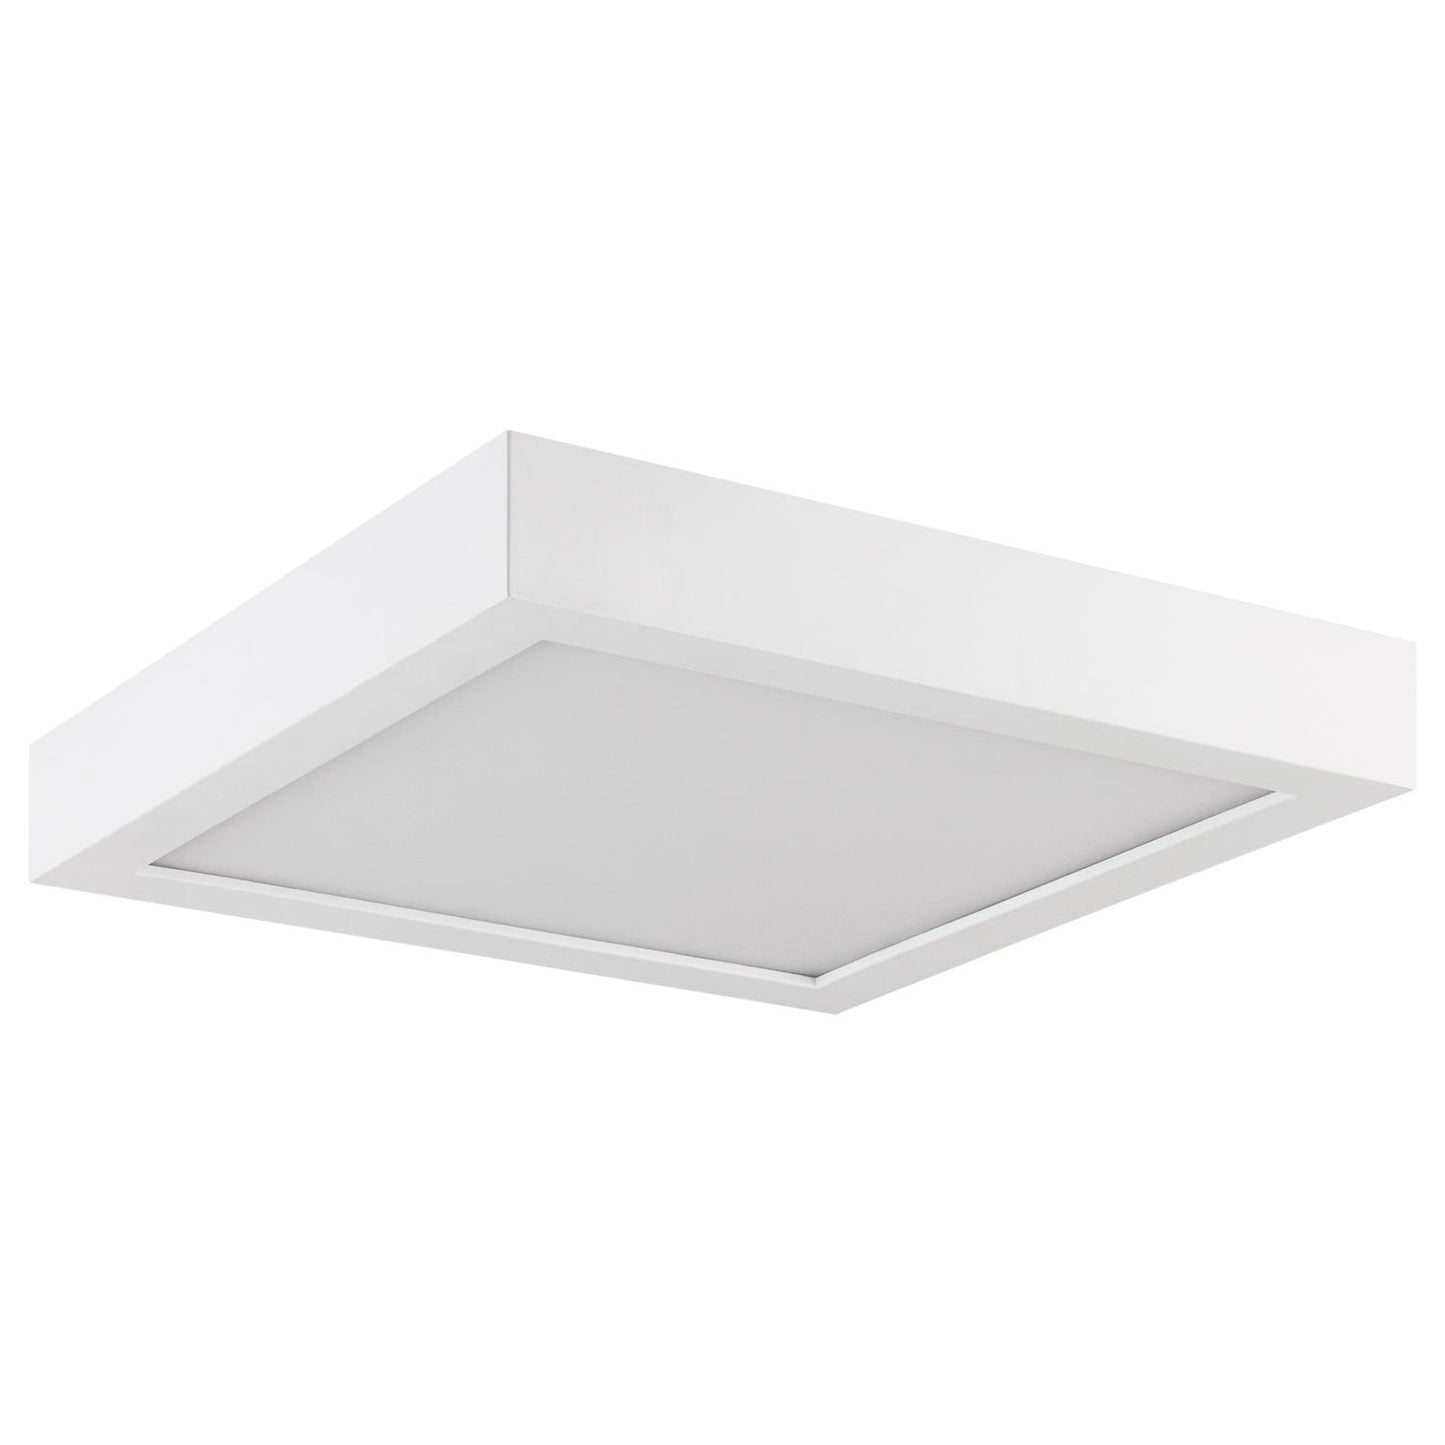 Sunlite LED 9-Inch Square Surface Mount Ceiling Light Fixture, 19 Watts, Dimmable, 4000K Cool White, Energy Star Certified